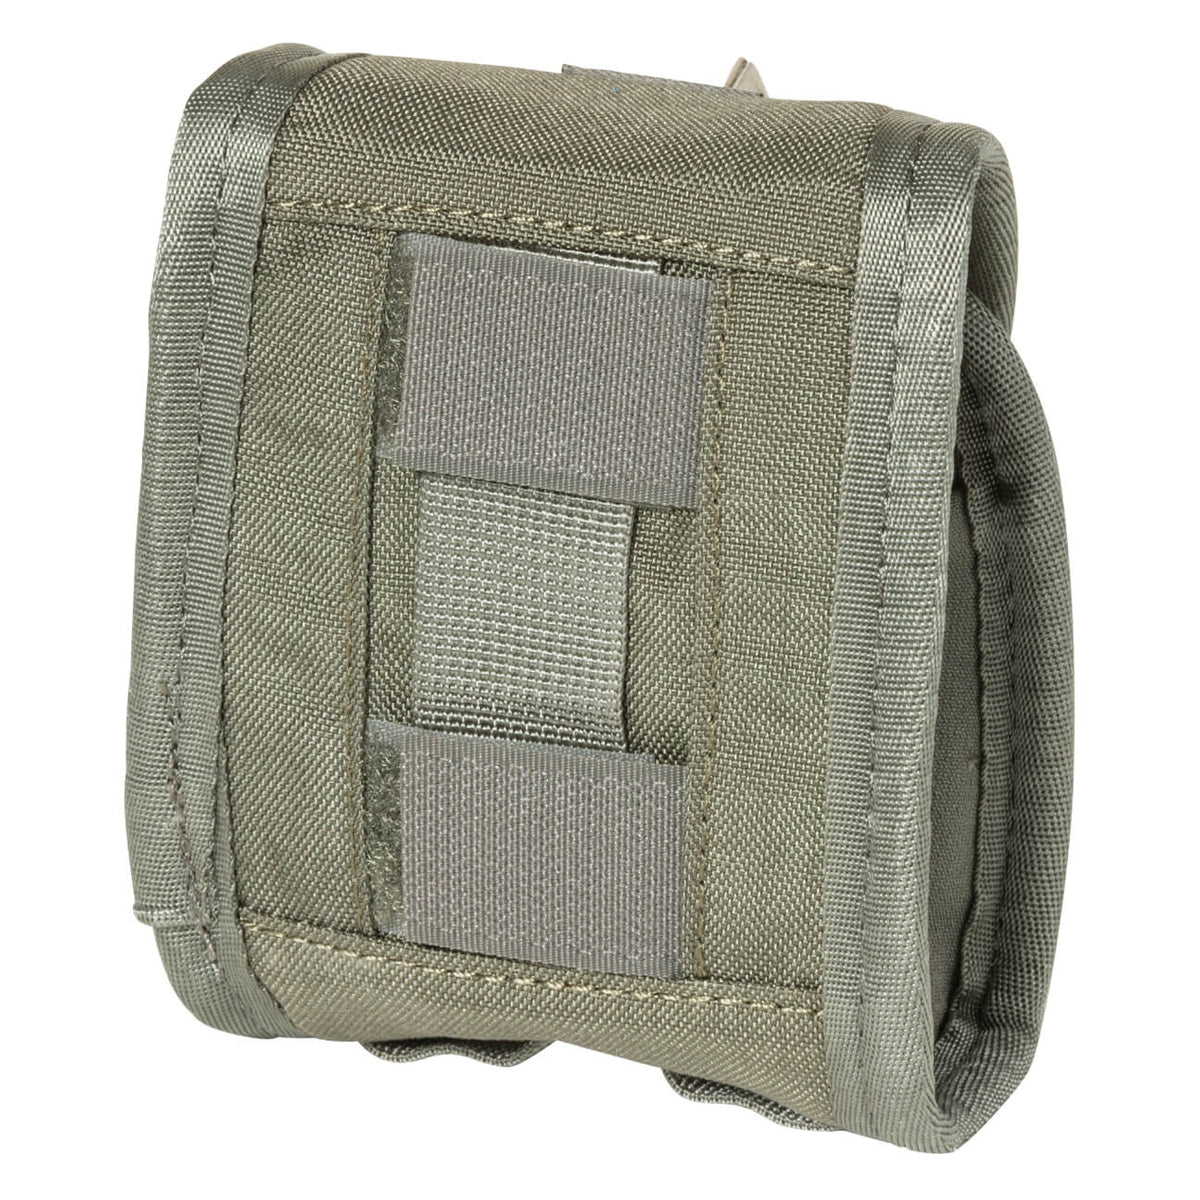 Mystery Ranch Quick Draw Rangefinder Pouch in Mystery Ranch Quick Draw Rangefinder Pouch by Mystery Ranch | Optics - goHUNT Shop by GOHUNT | Mystery Ranch - GOHUNT Shop